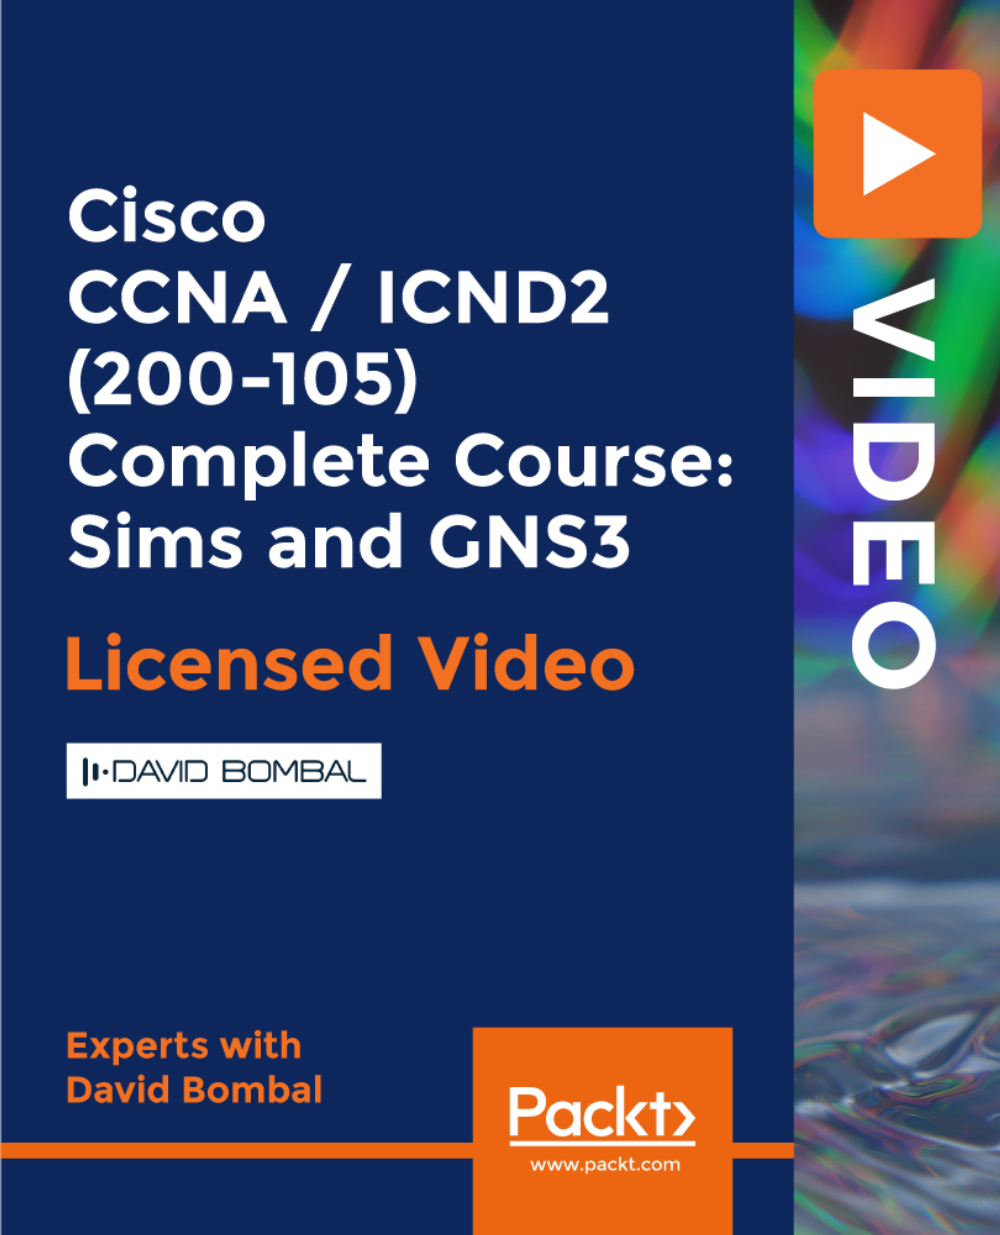 Cisco CCNA / ICND2 (200-105) Complete Course: Sims and GNS3